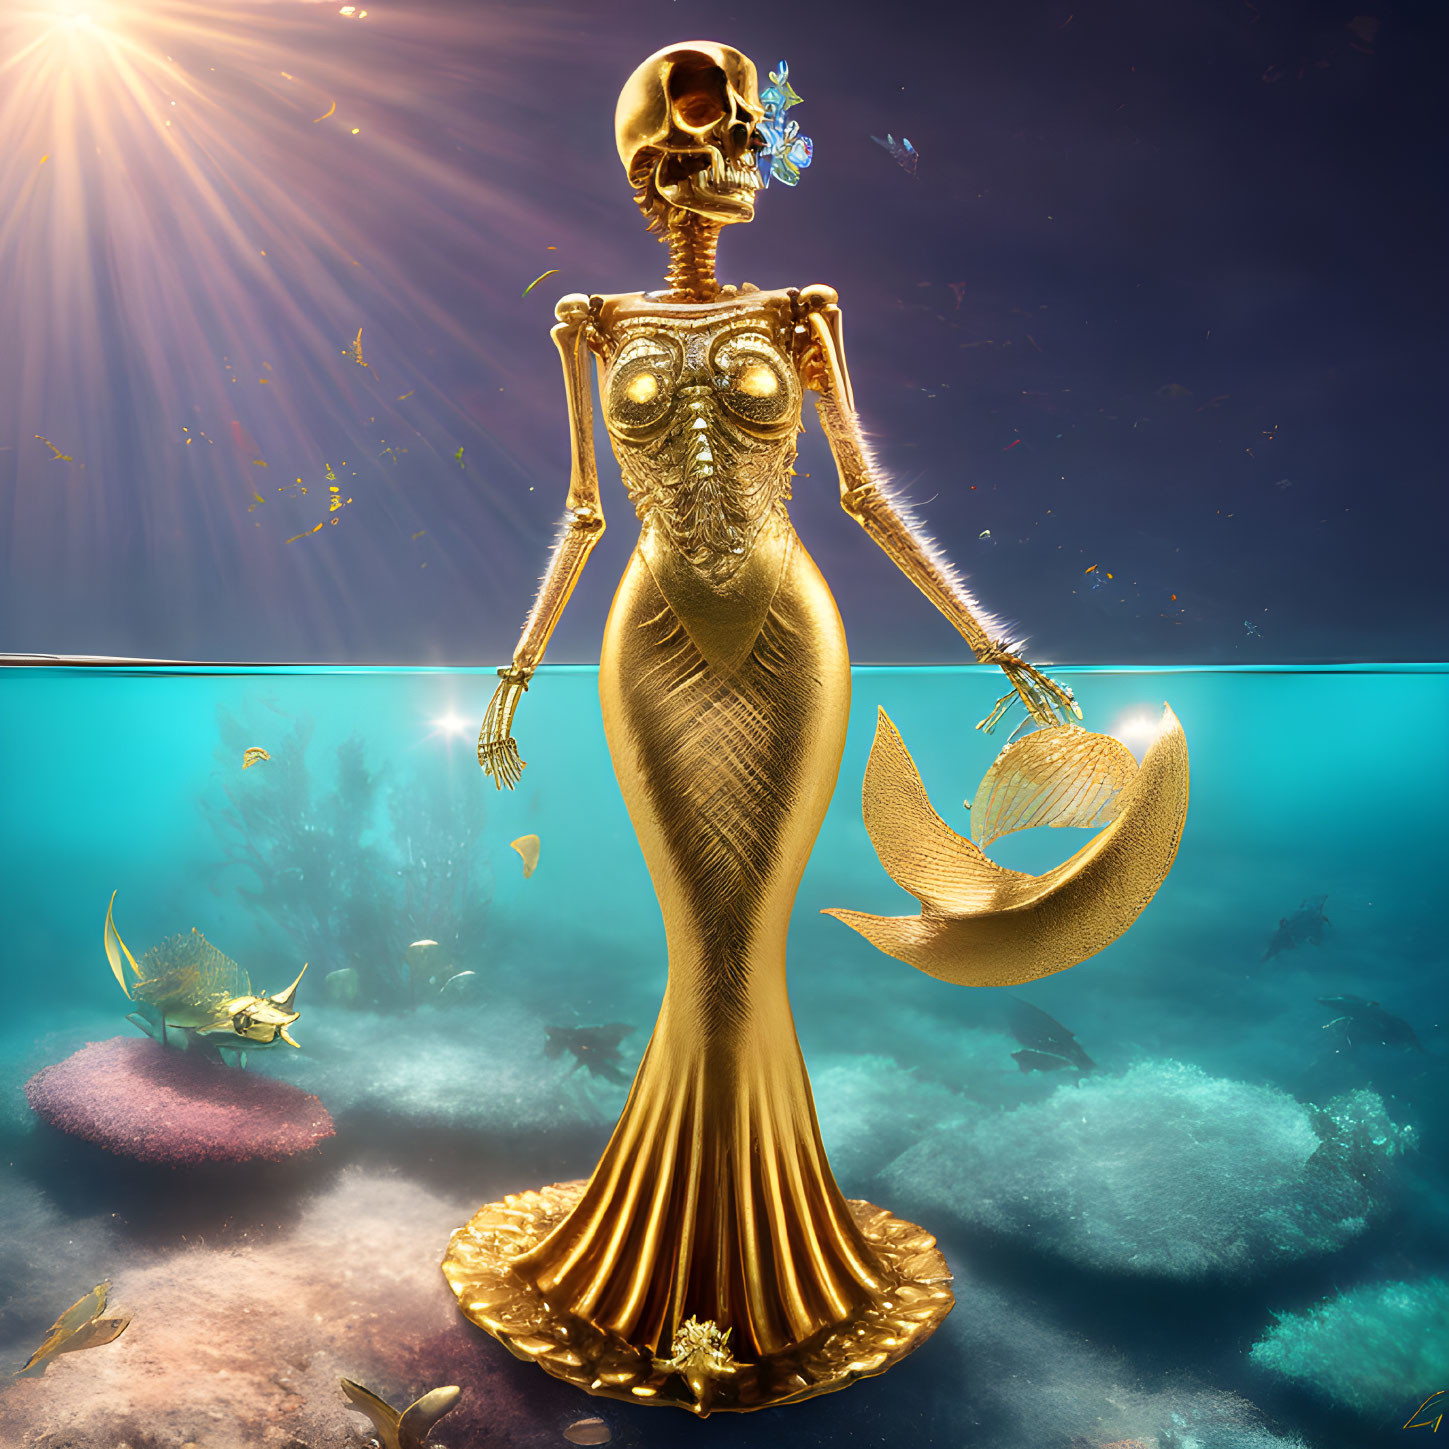 Golden skeletal mermaid with human skull surrounded by flowers, fishes, and corals underwater.